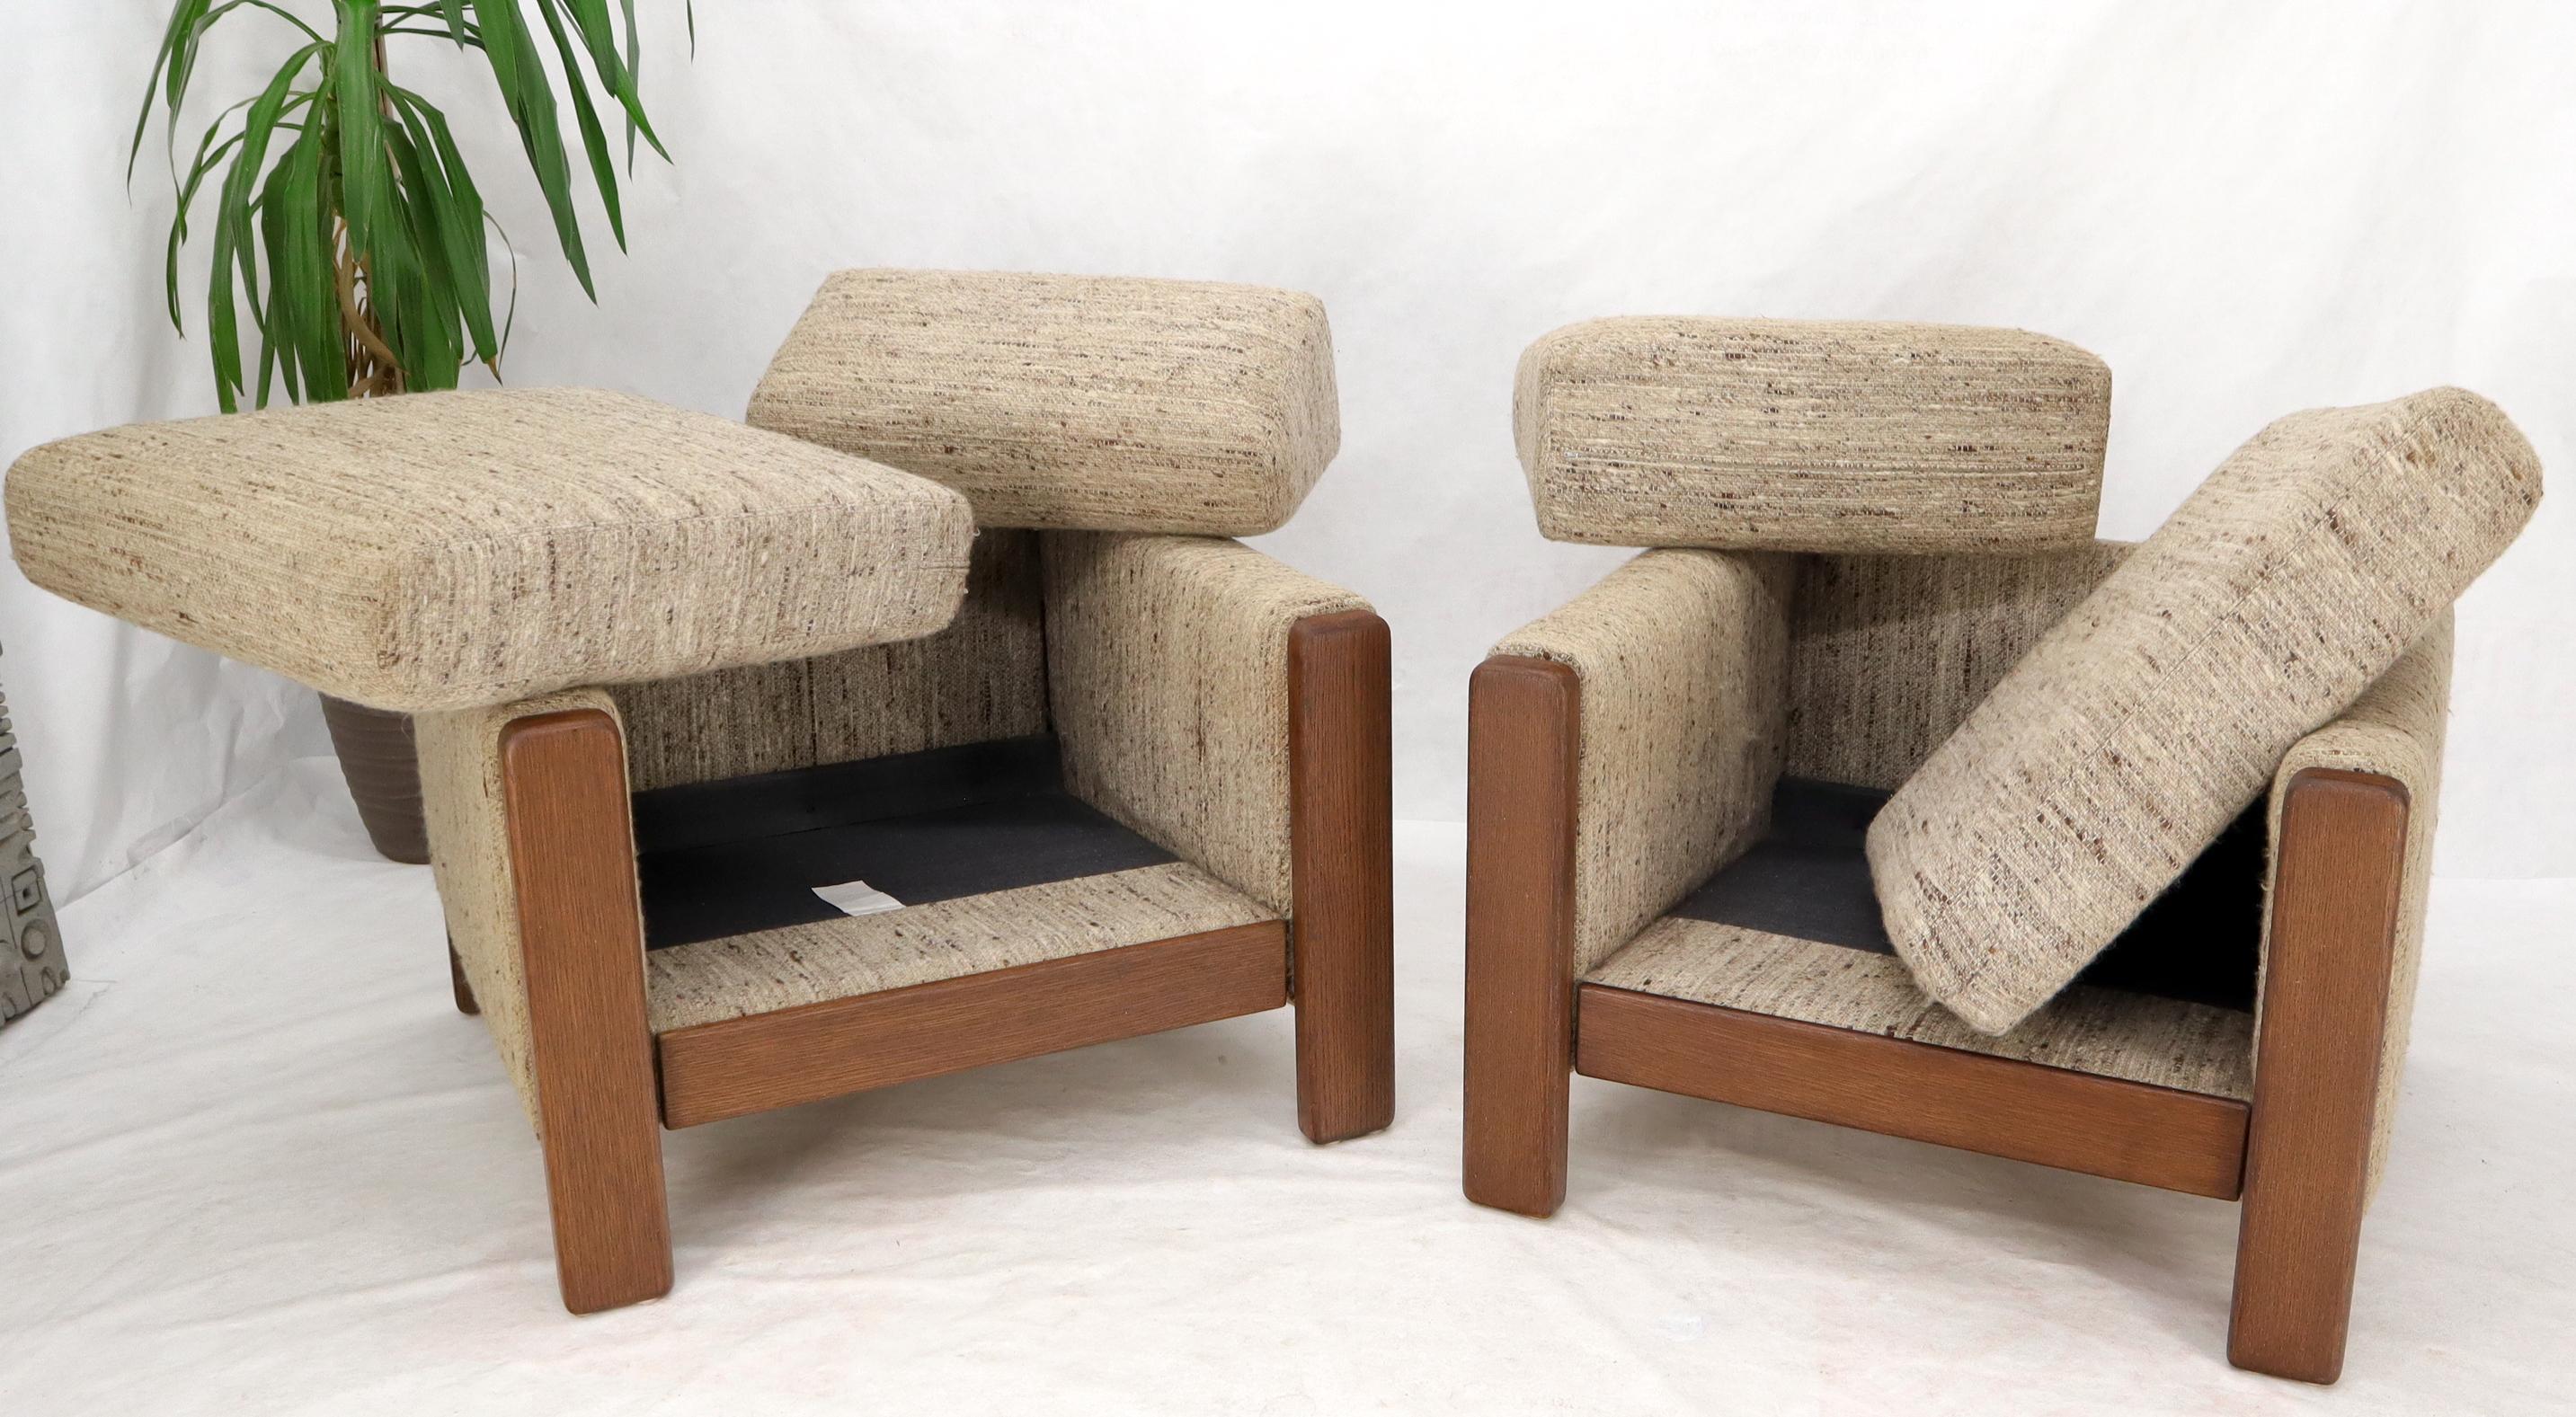 Pair of Knoll Wool Upholstery Cube Shape Lounge Club Chairs Teak Arms 1